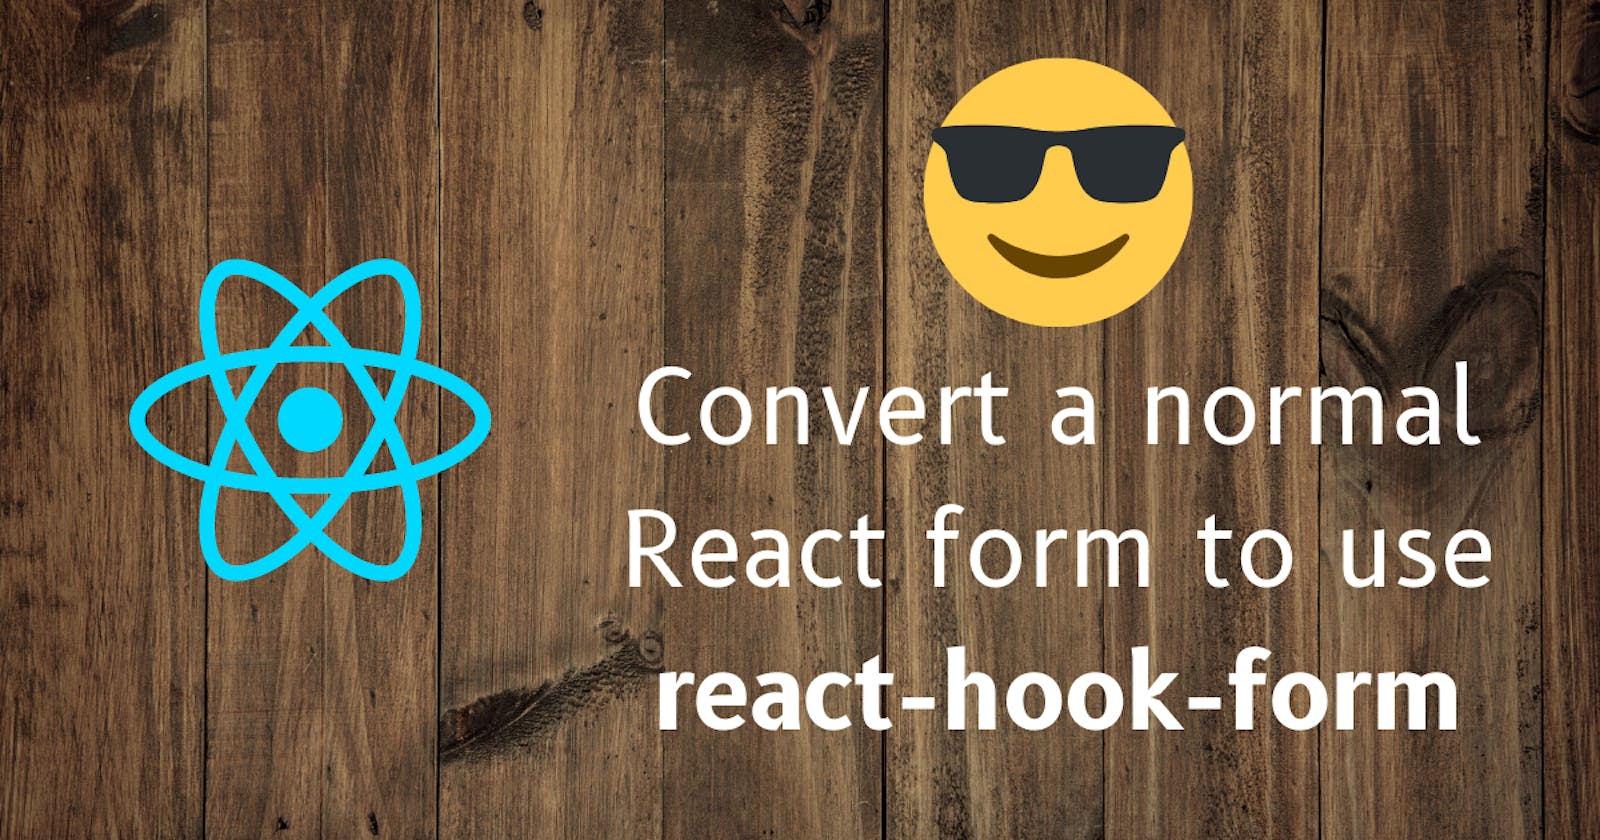 😎 How to convert a normal React form to use react-hook-form?